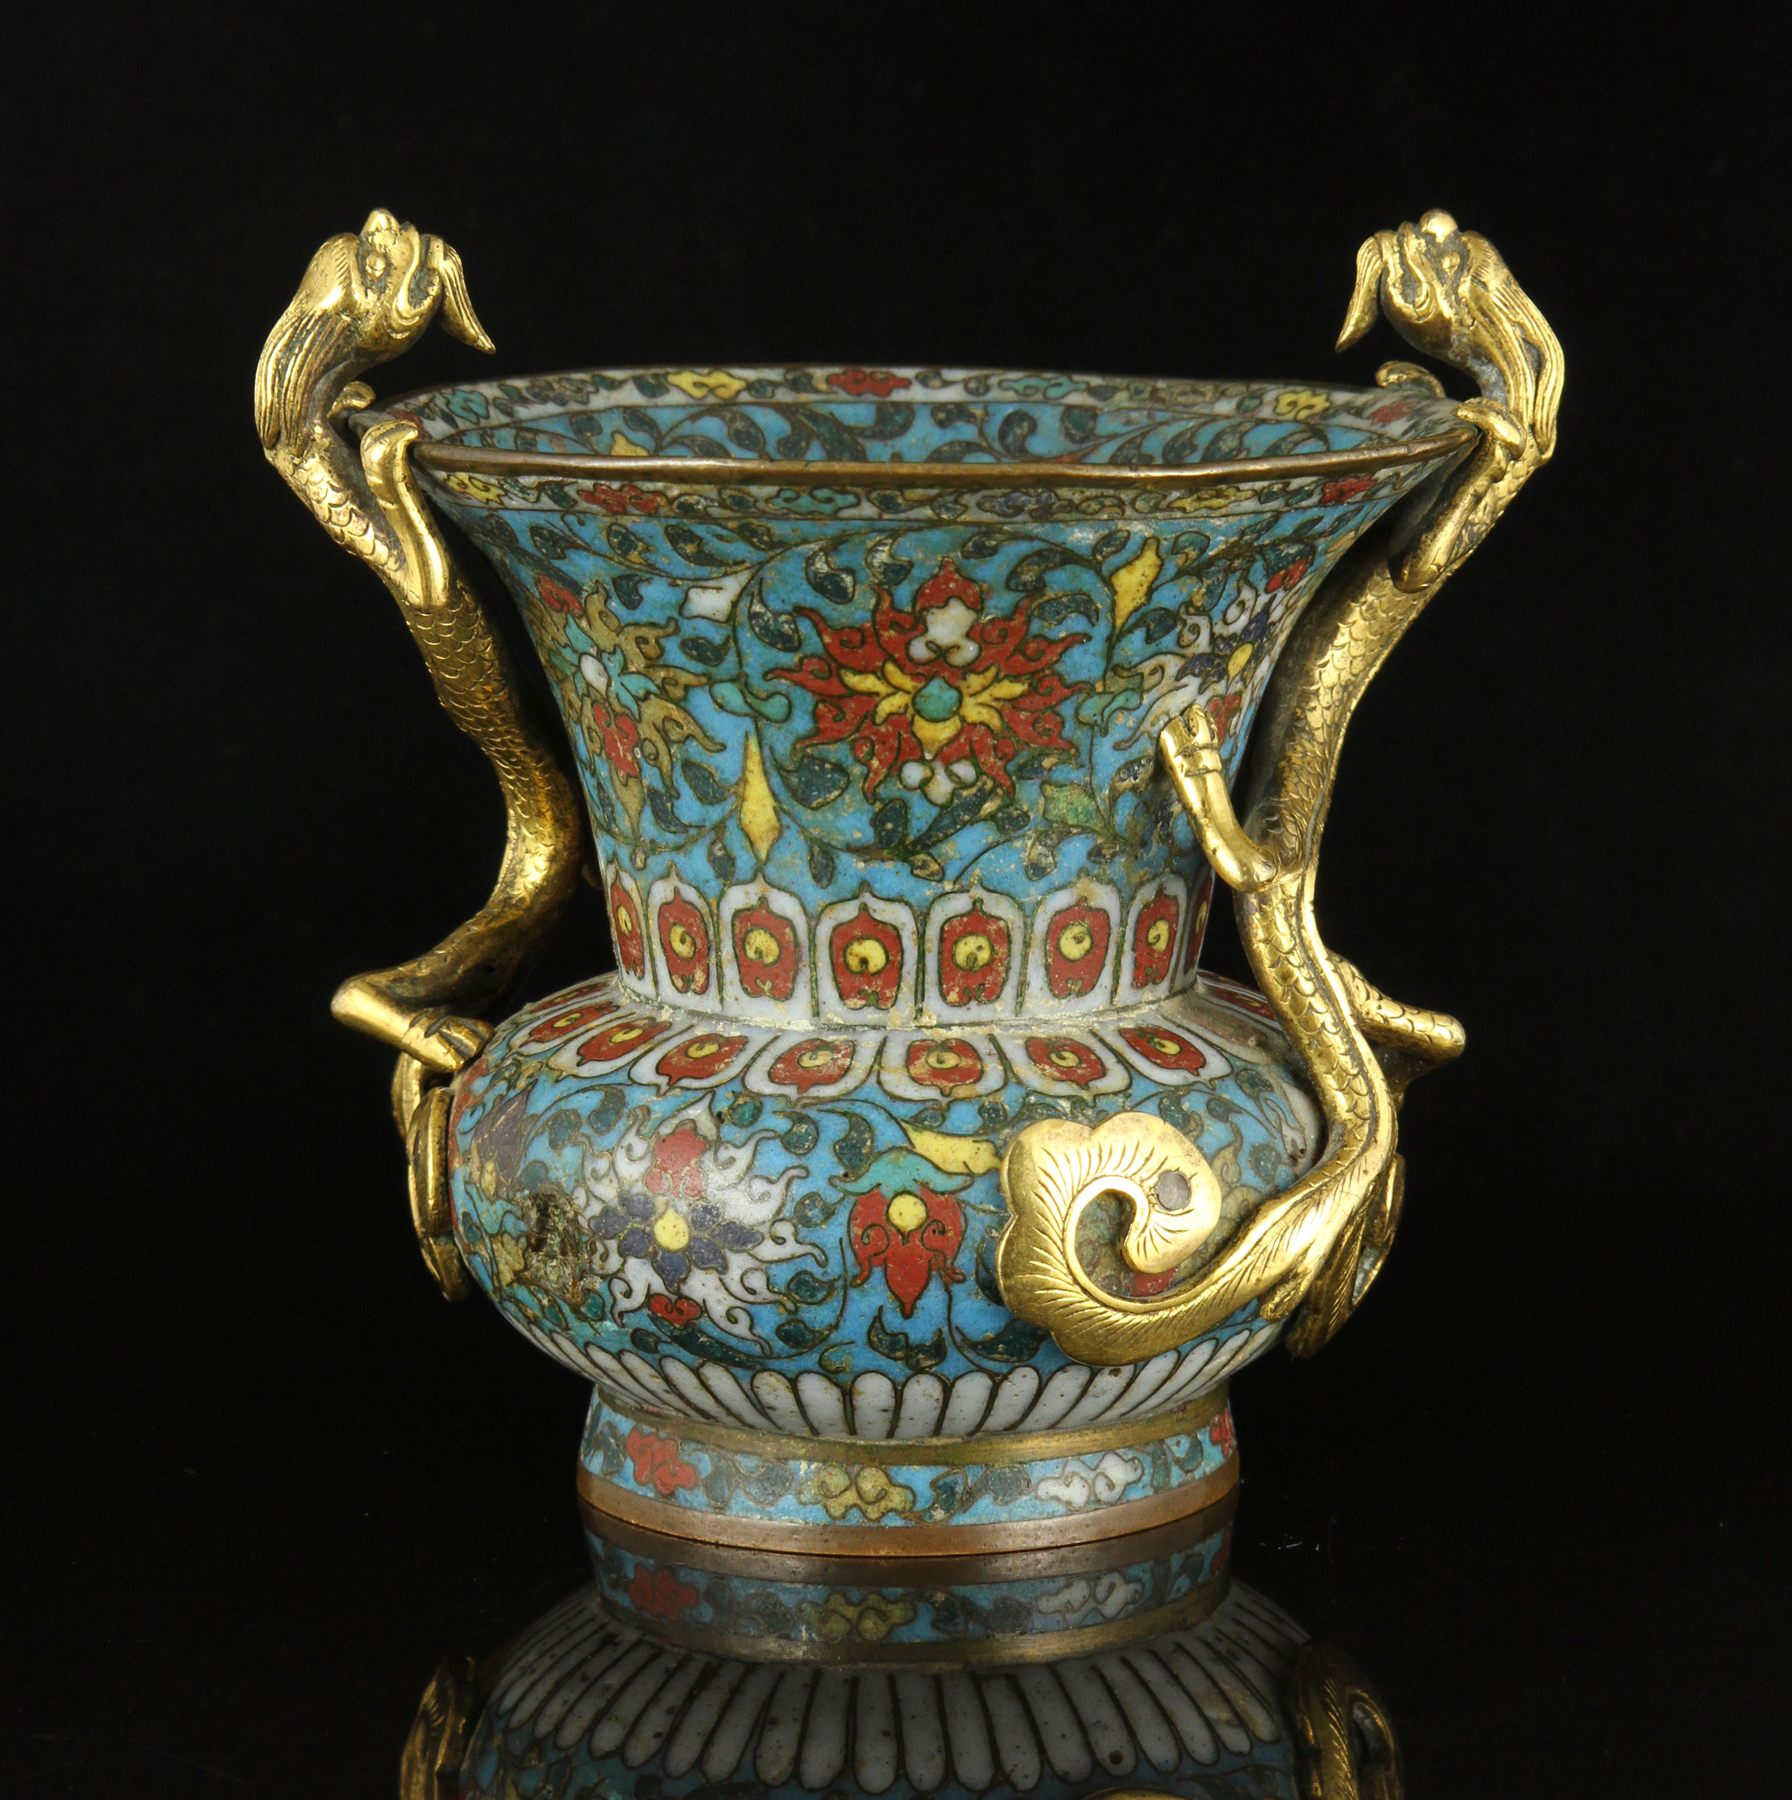 Early 16th century Chinese Ming Dynasty, cloisonné enamel Zun vase